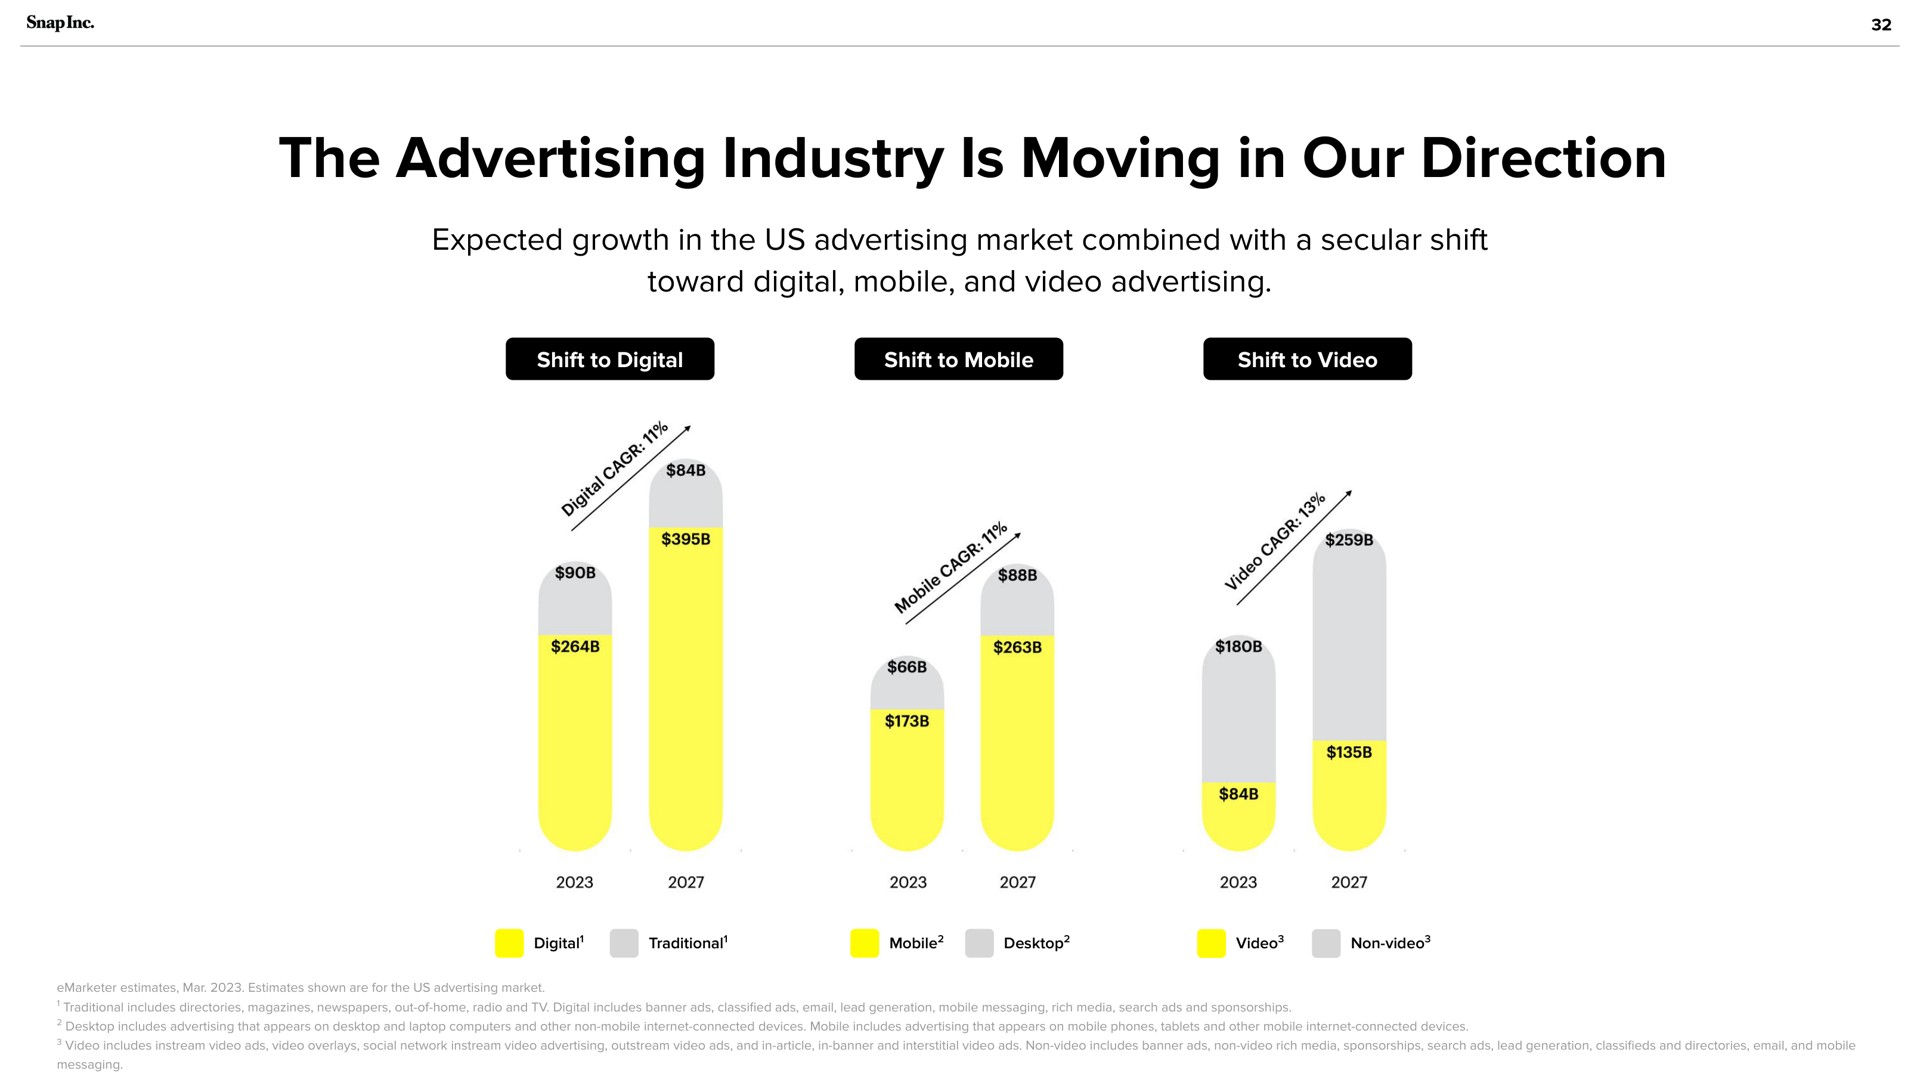 the advertising industry is moving in our direction | Snap Inc